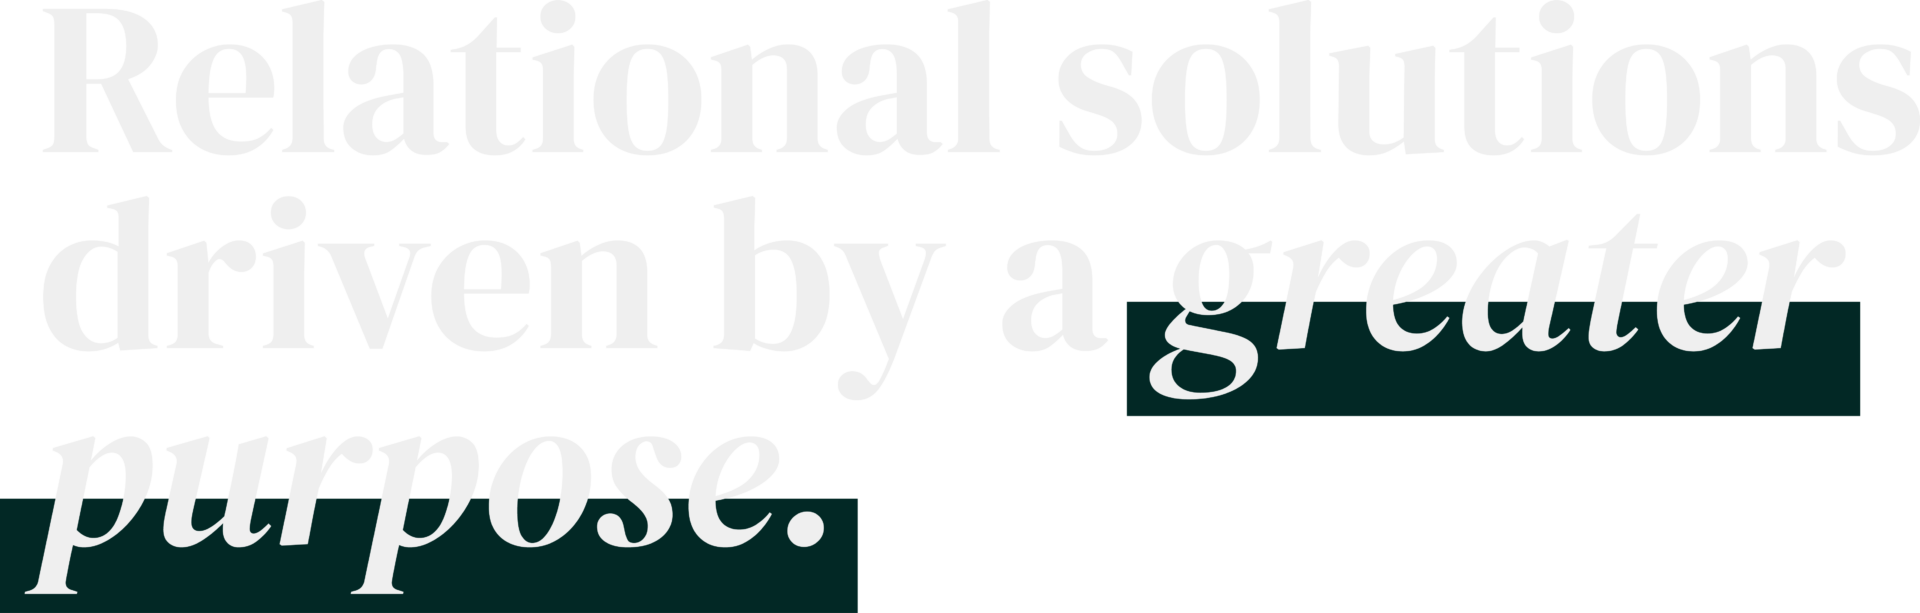 Home page headline in serif font with dark green underline that says, "Relational solutions driven by a greater purpose."